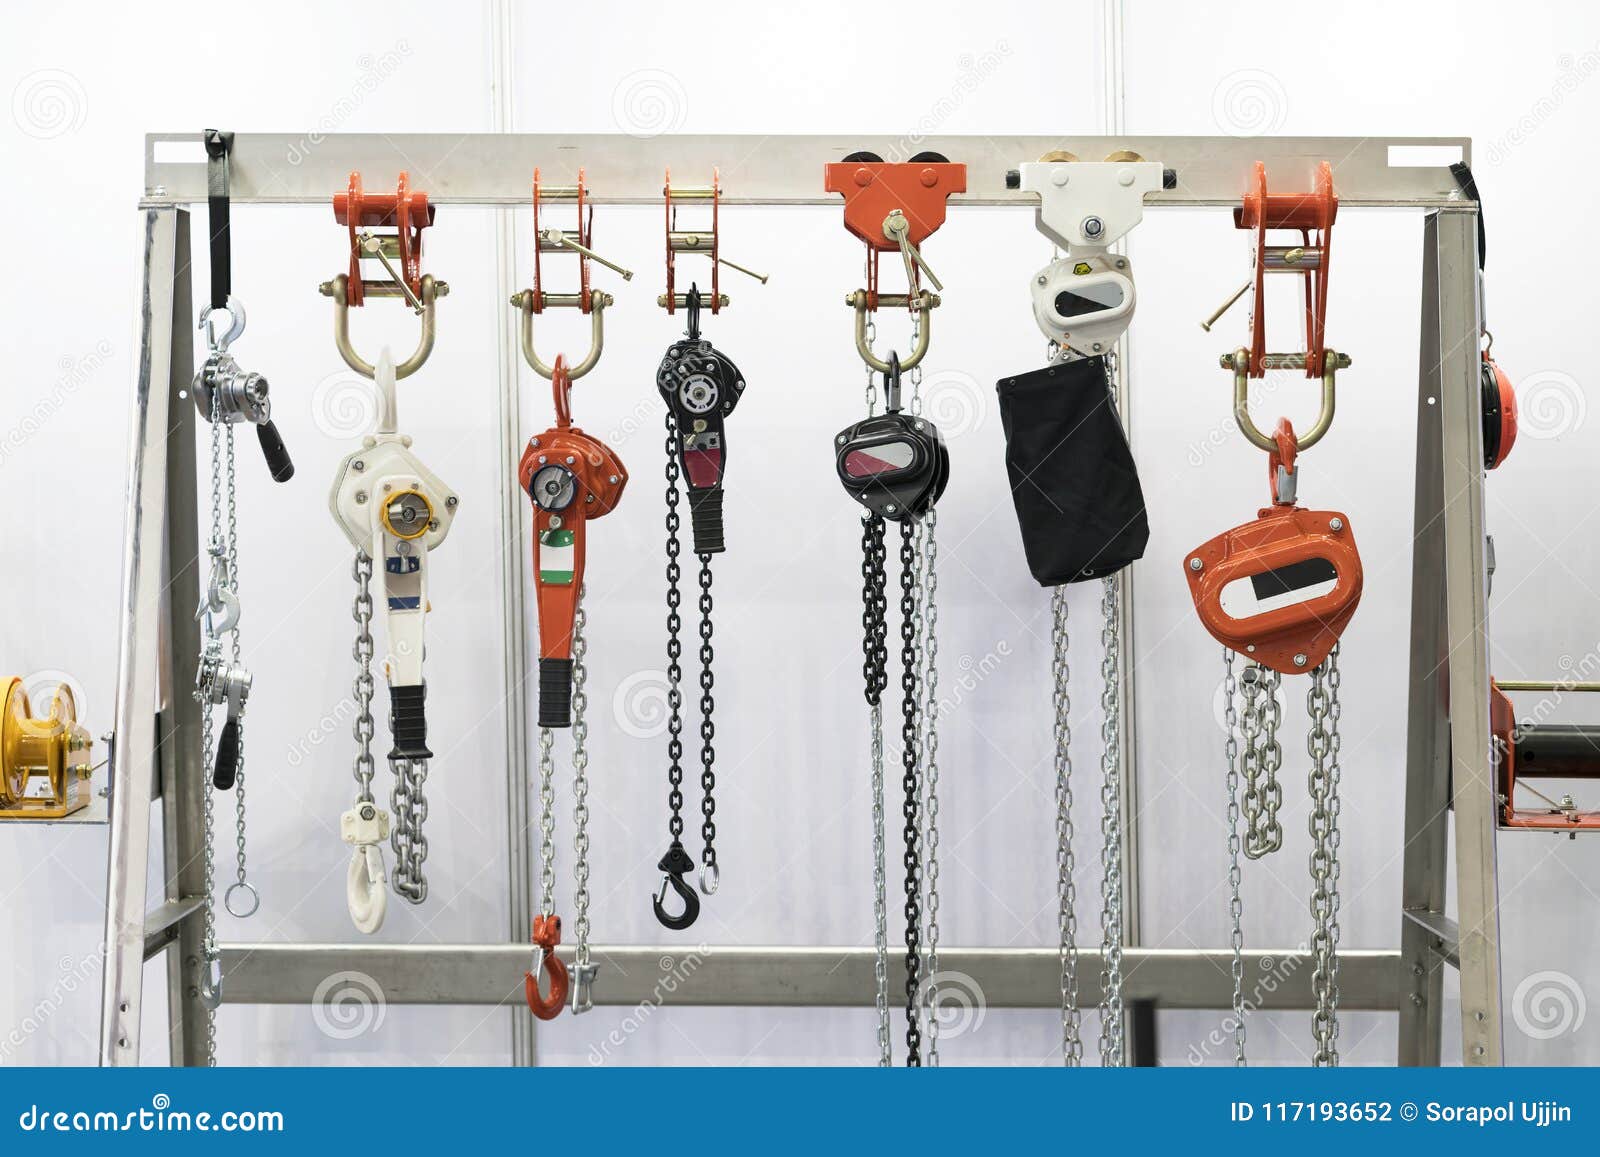 industrial chain hoist for reduce working load and lifting heavy